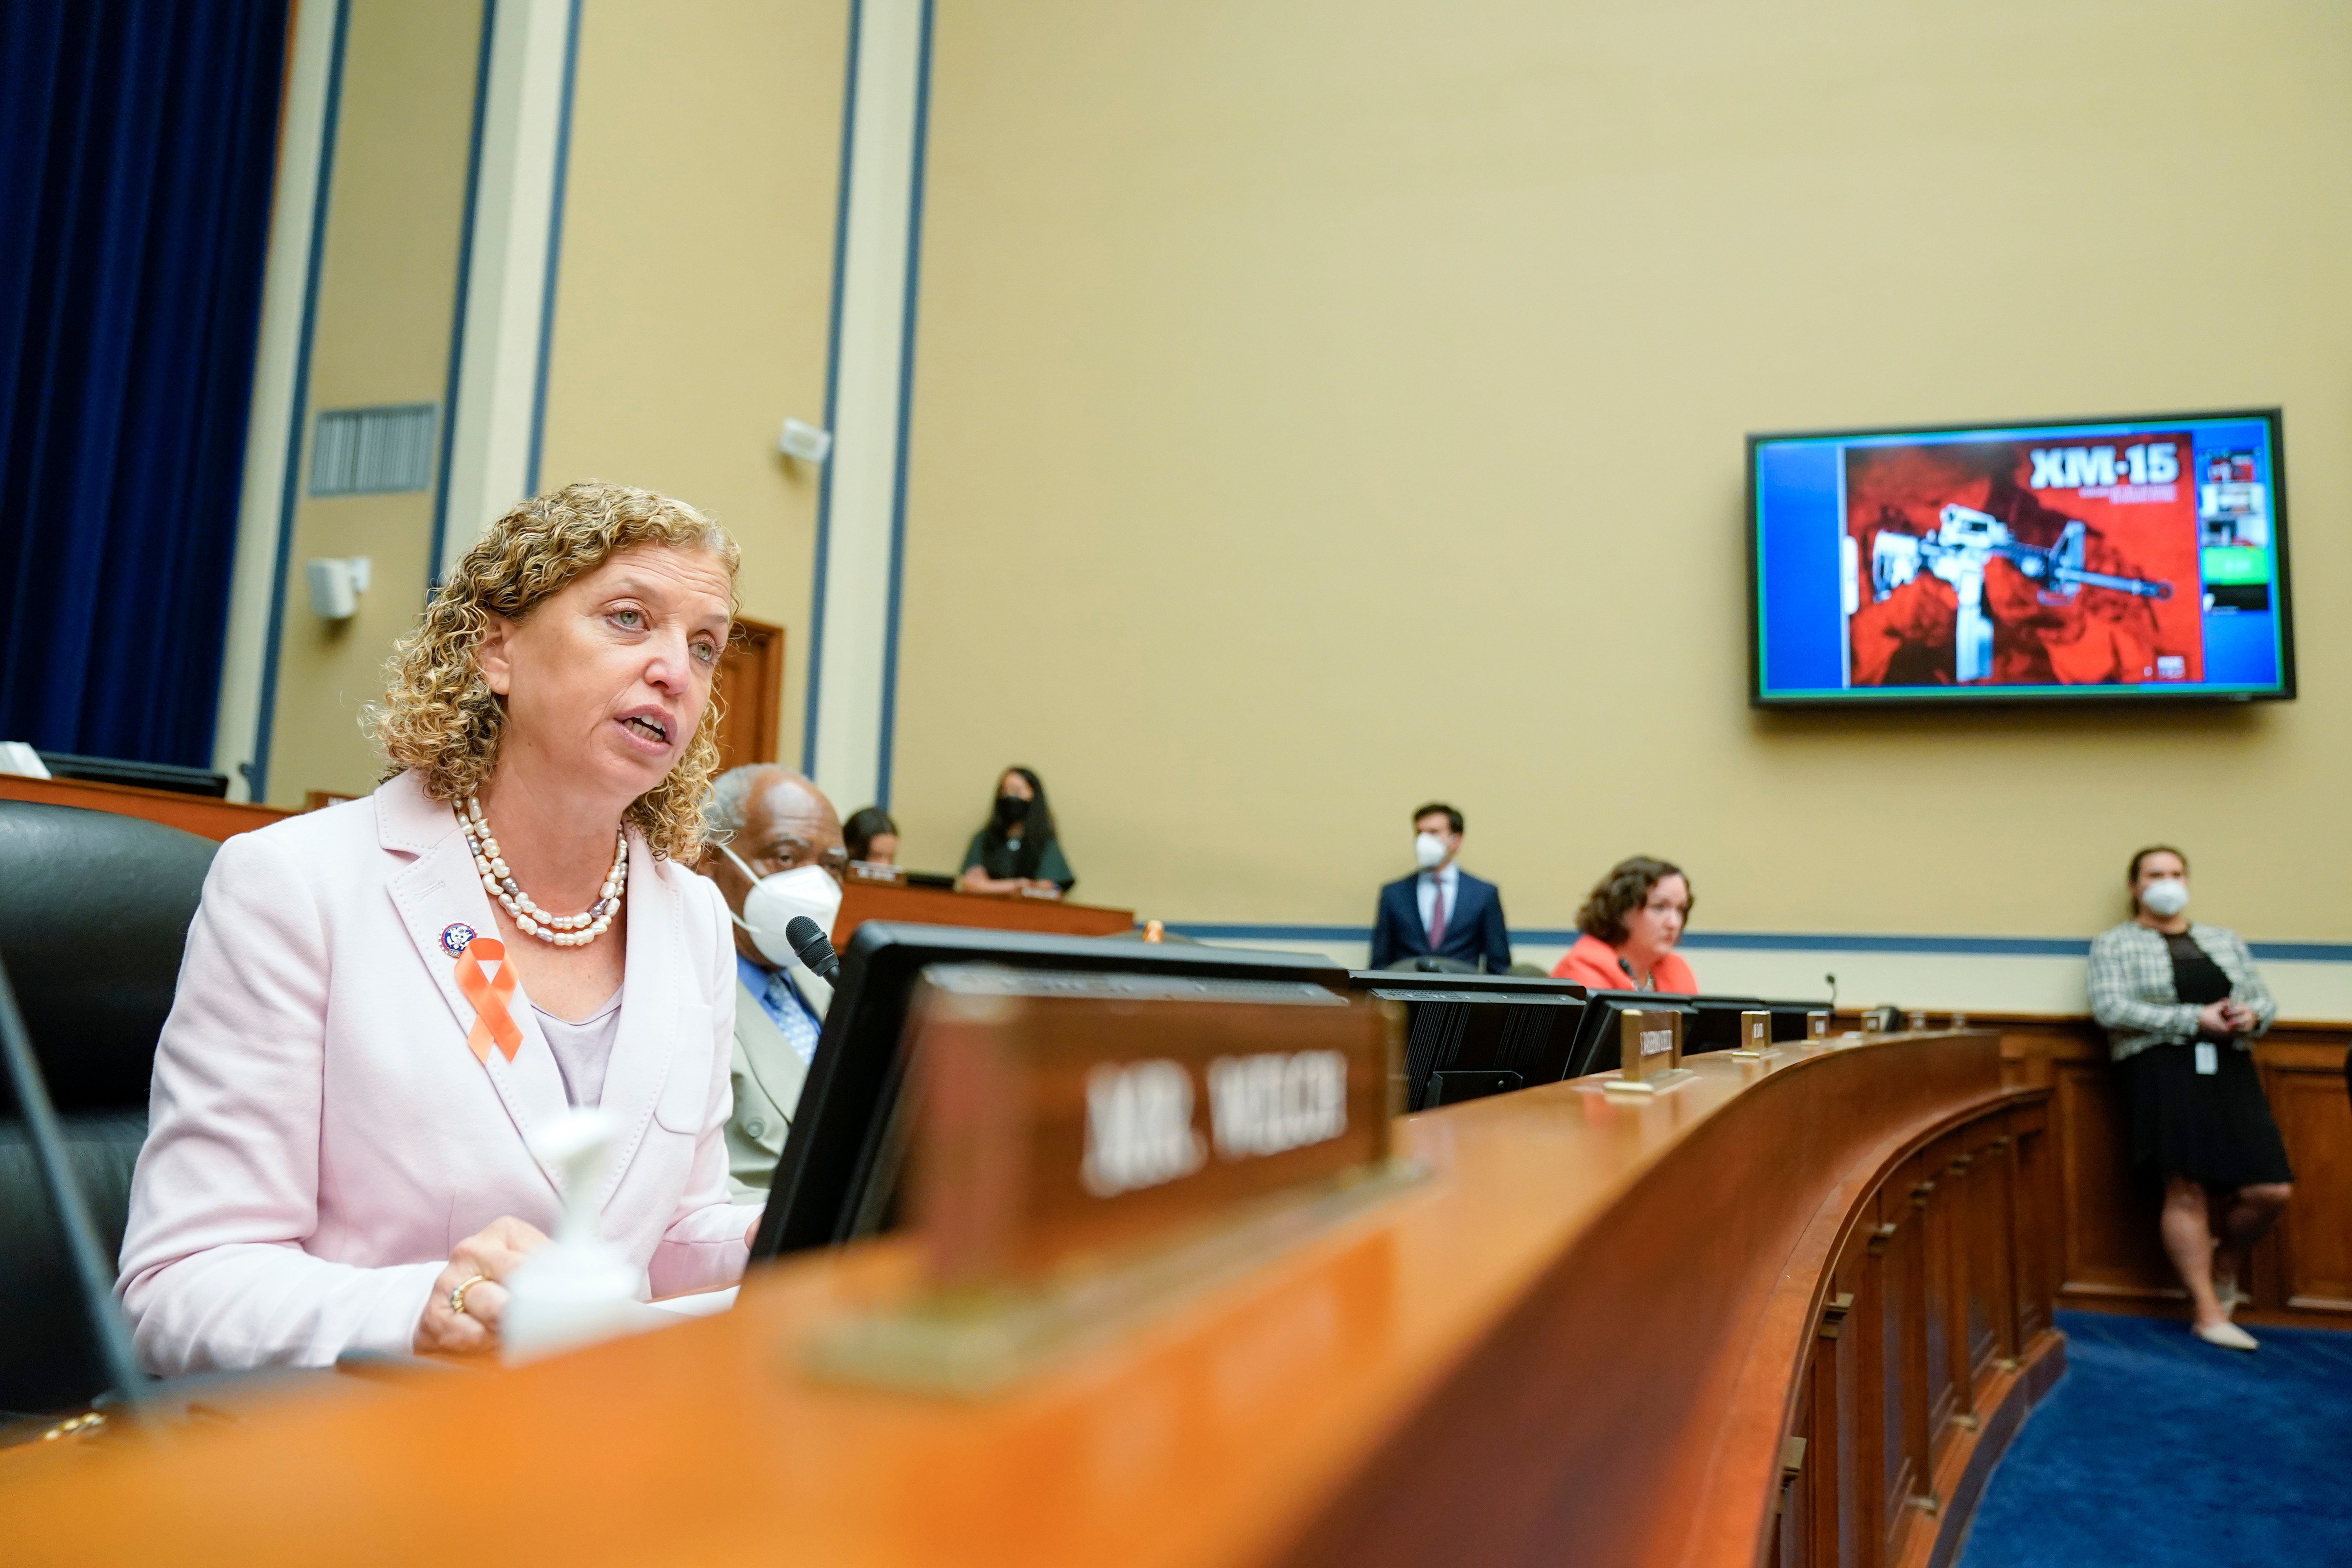 Rep. Debbie Wasserman Schultz, D-Fla., speaks during a House Committee on Oversight and Reform hearing on gun violence on Capitol Hill in Washington, Wednesday, June 8, 2022